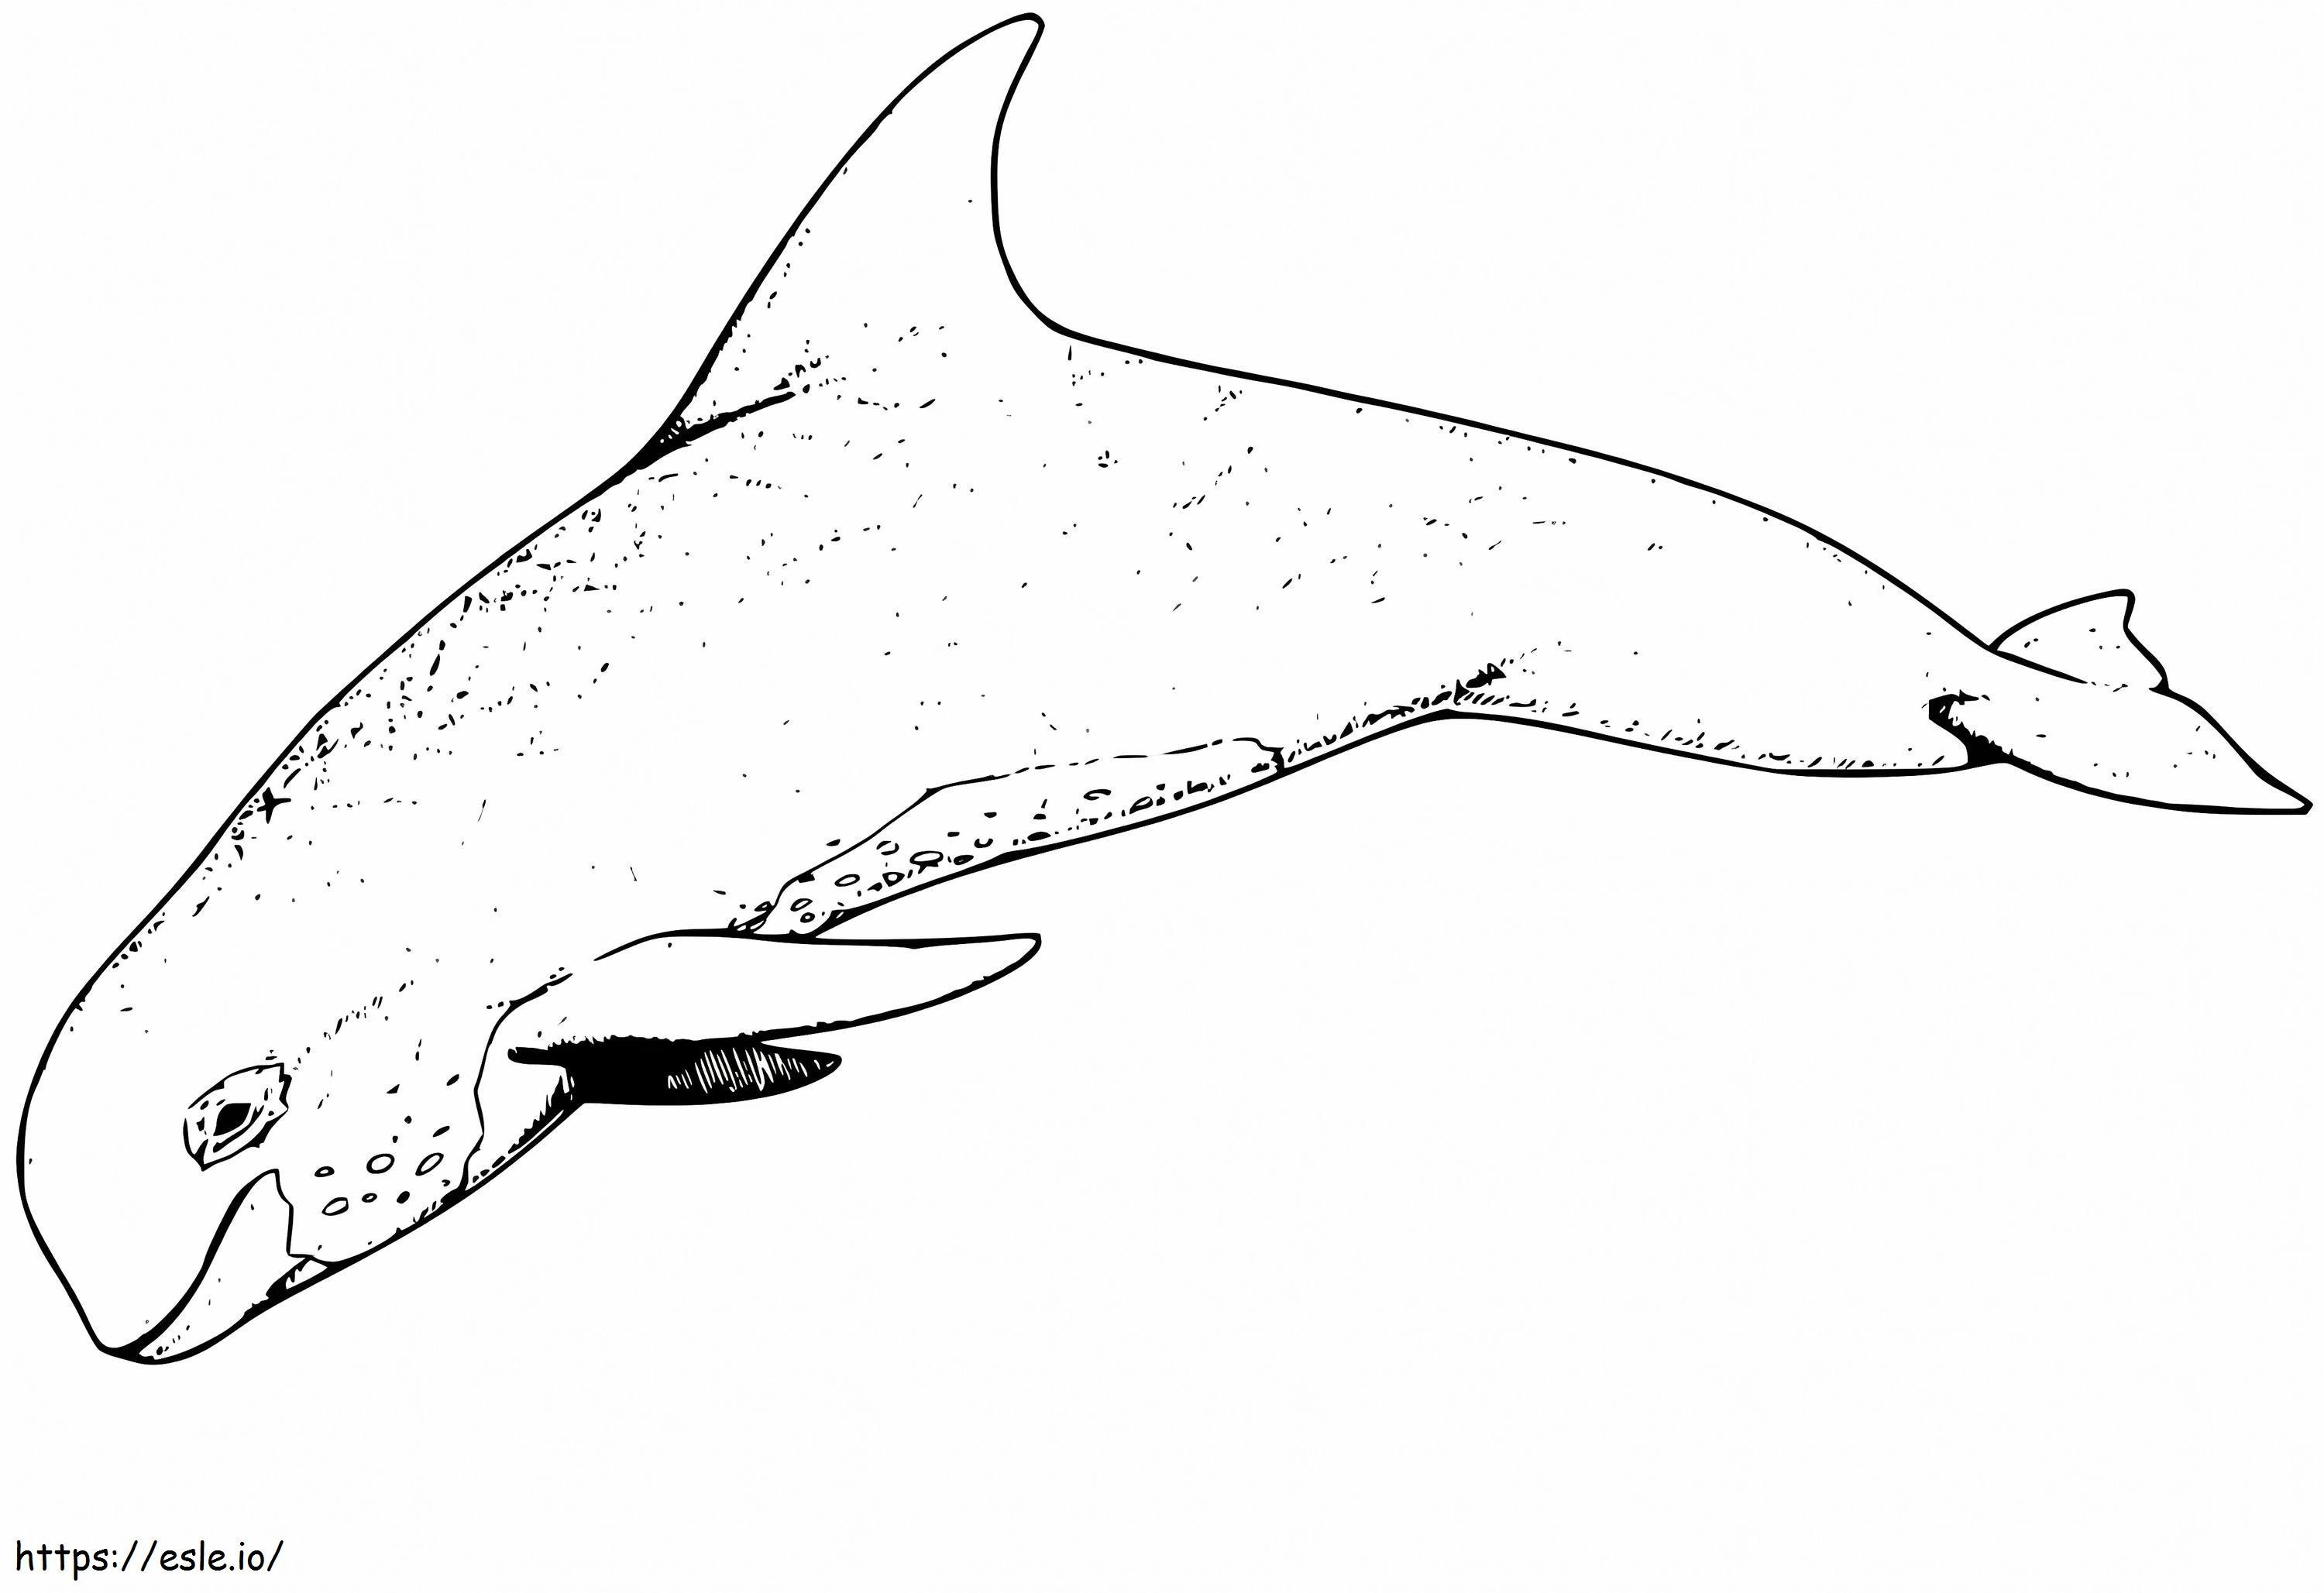 Normal Porpoise coloring page